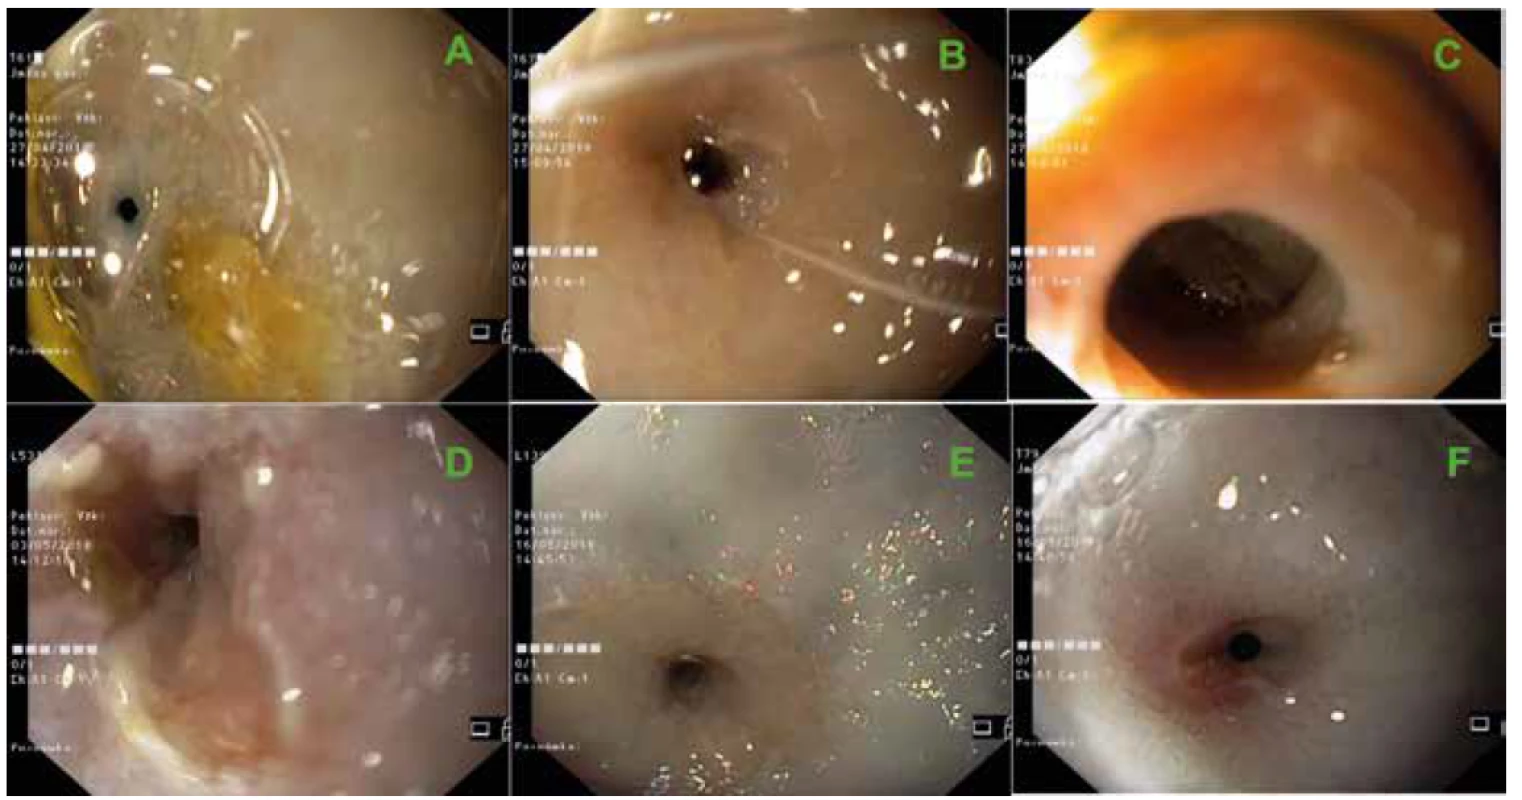 Endoscopic views of stricture sites developed after complete CED during control endoscopies just before necropsy.<br>
Minipigs T61 (A), T67 (B), T83 (C), L531 (D), L139 (E) and T79 (F).